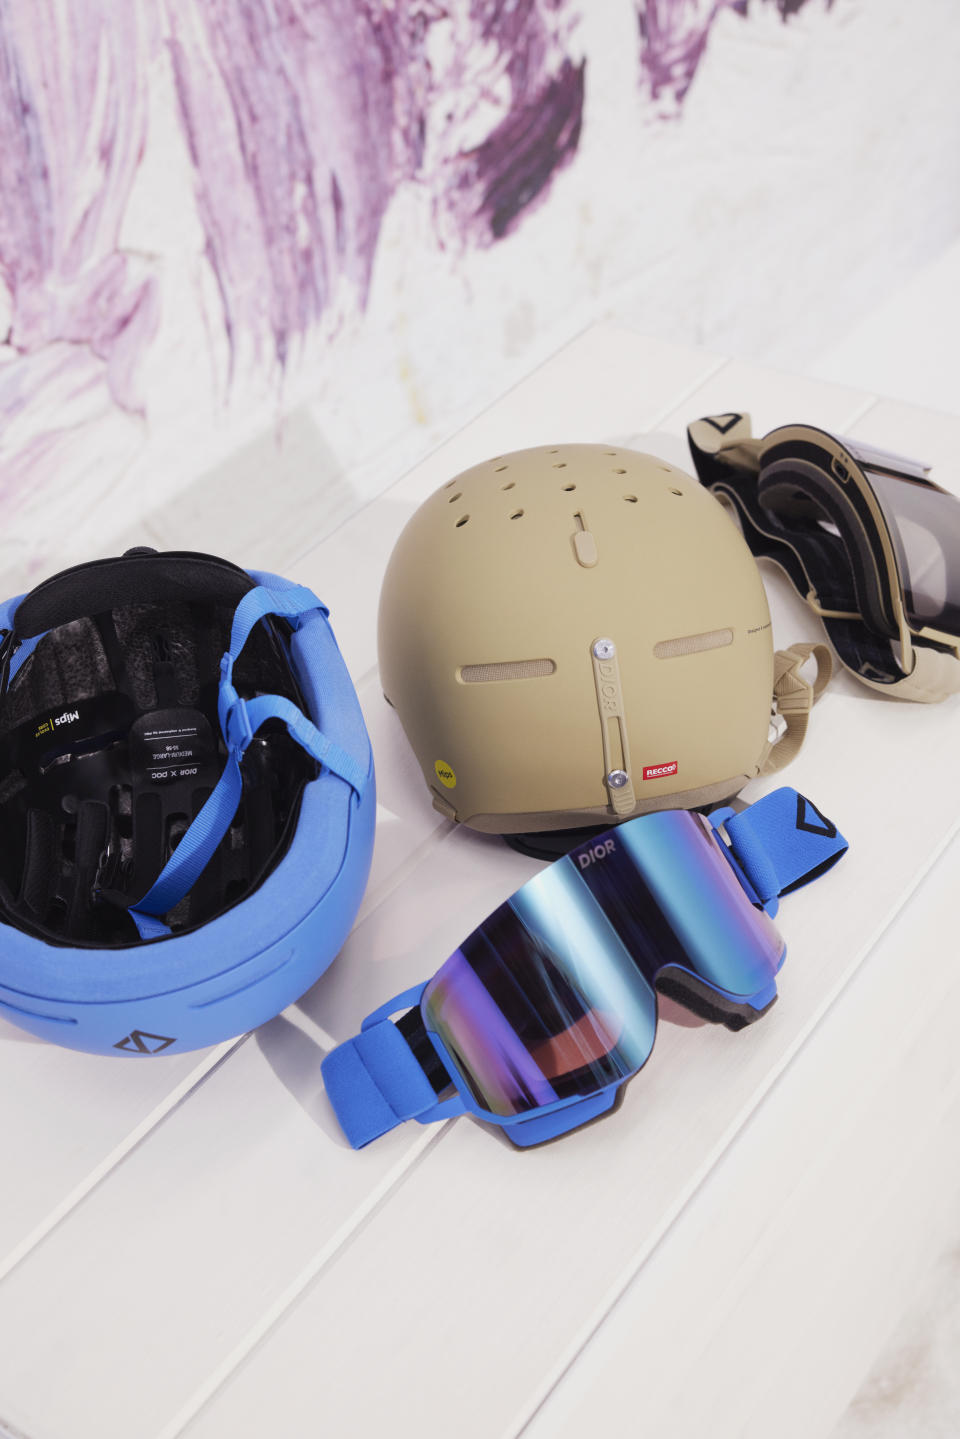 Helmets and goggles from the Dior men's ski capsule collection.